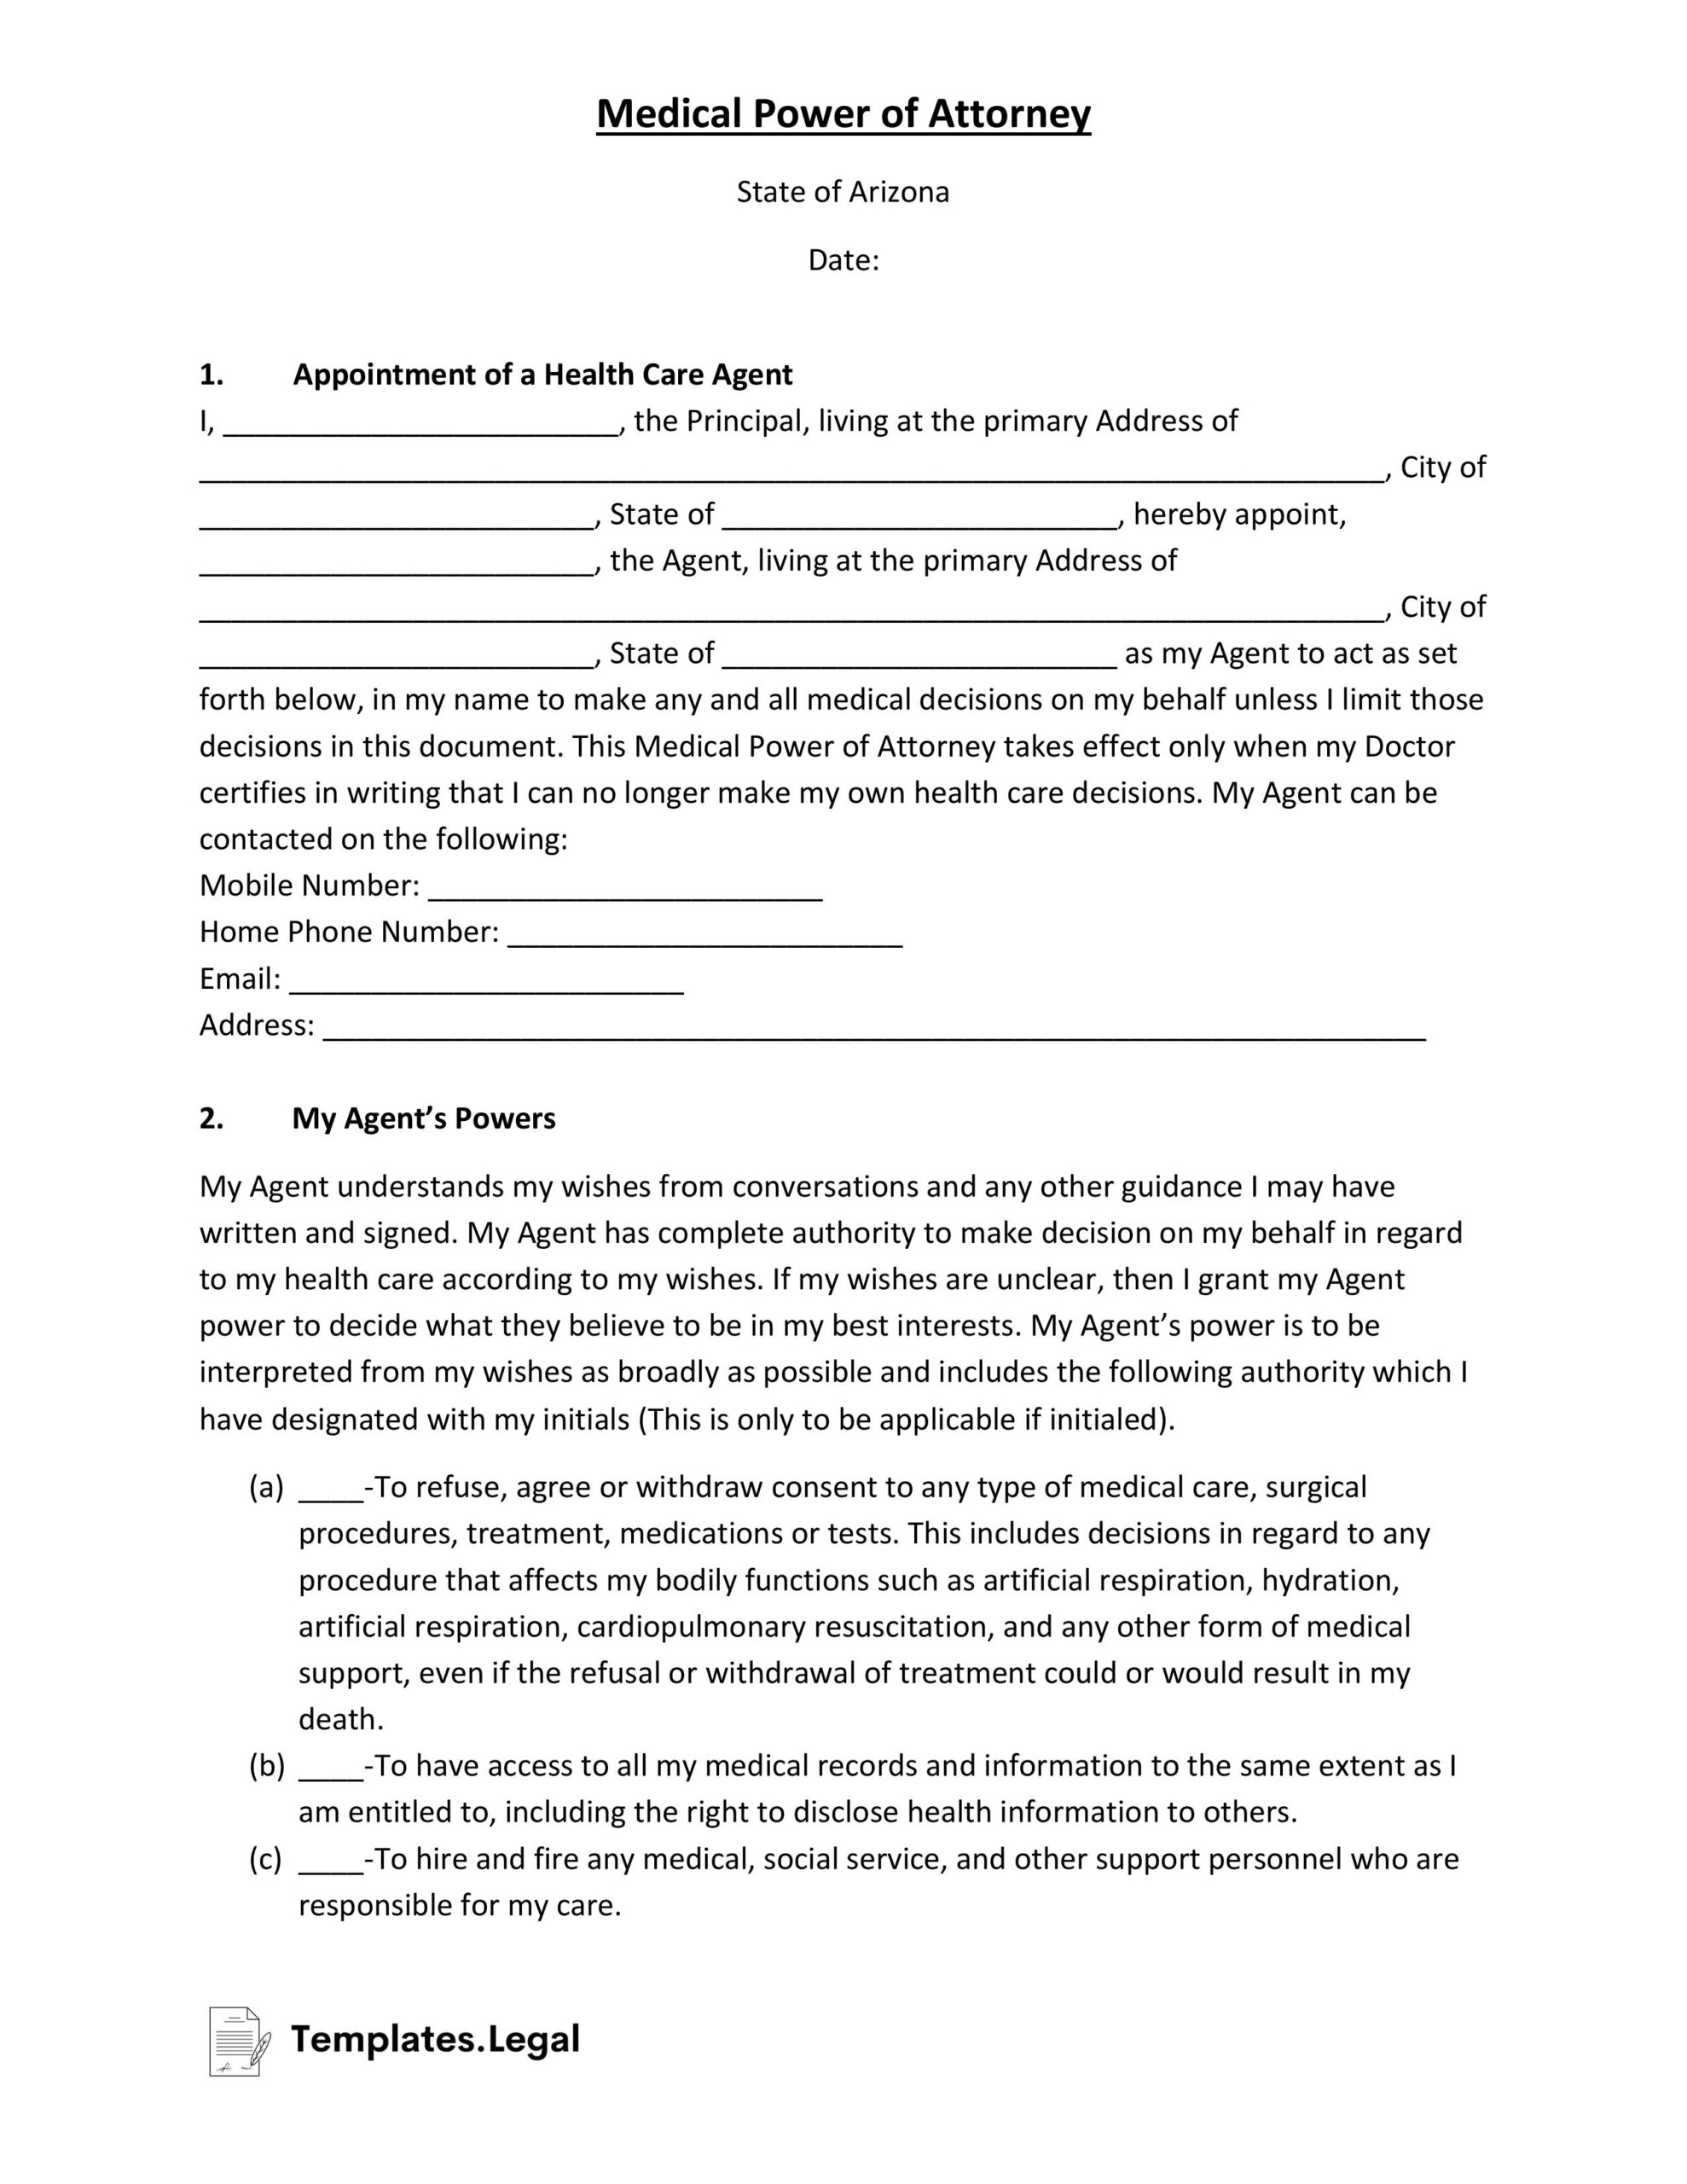 Arizona Medical Power of Attorney- Templates.Legal